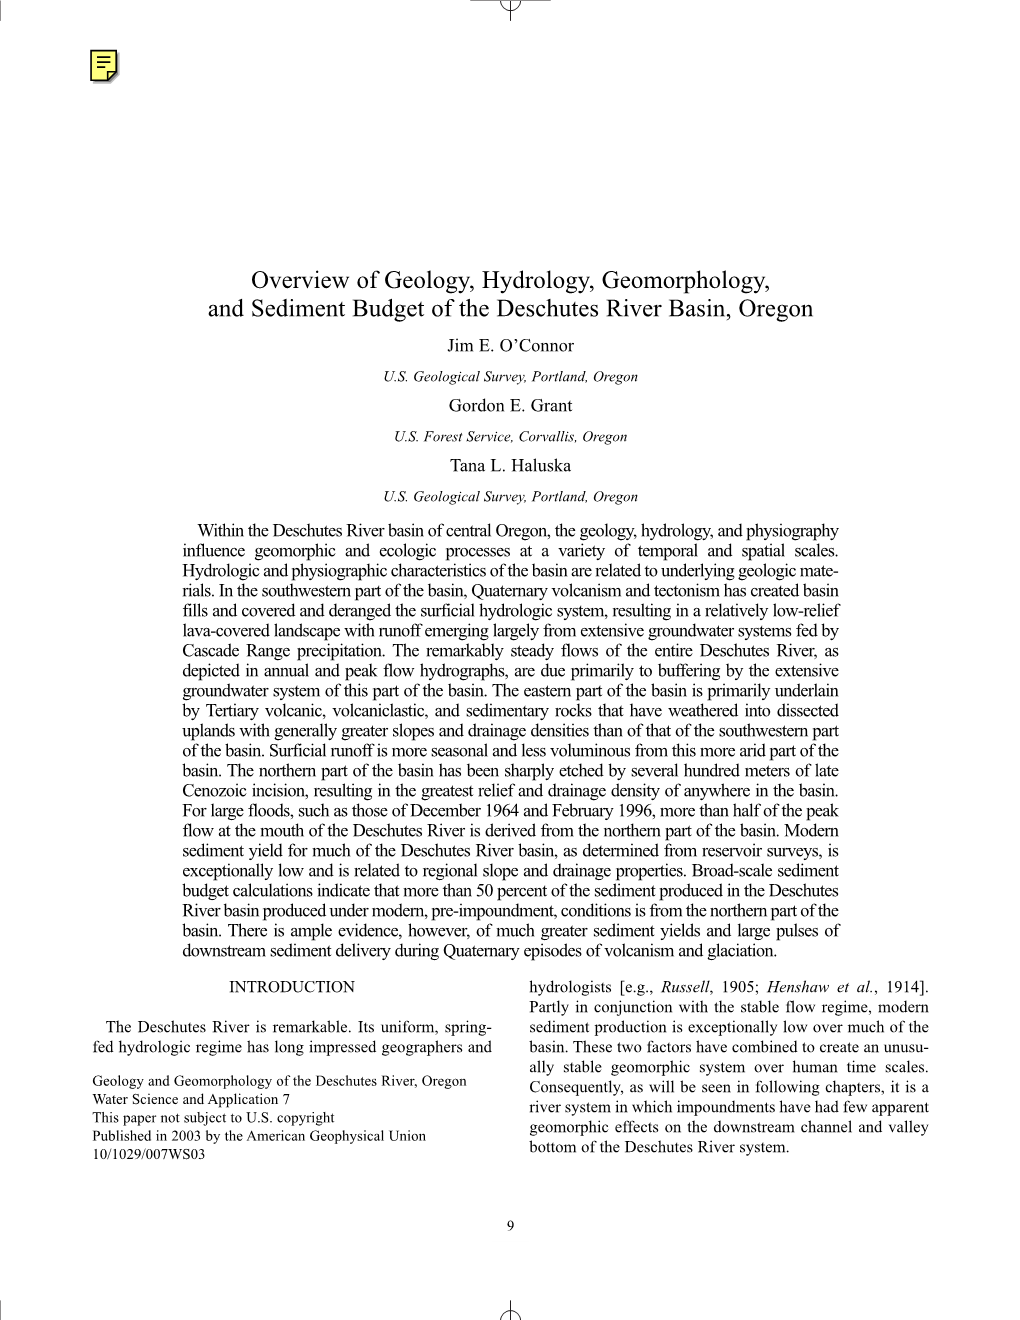 Overview of Geology, Hydrology, Geomorphology, and Sediment Budget of the Deschutes River Basin, Oregon Jim E